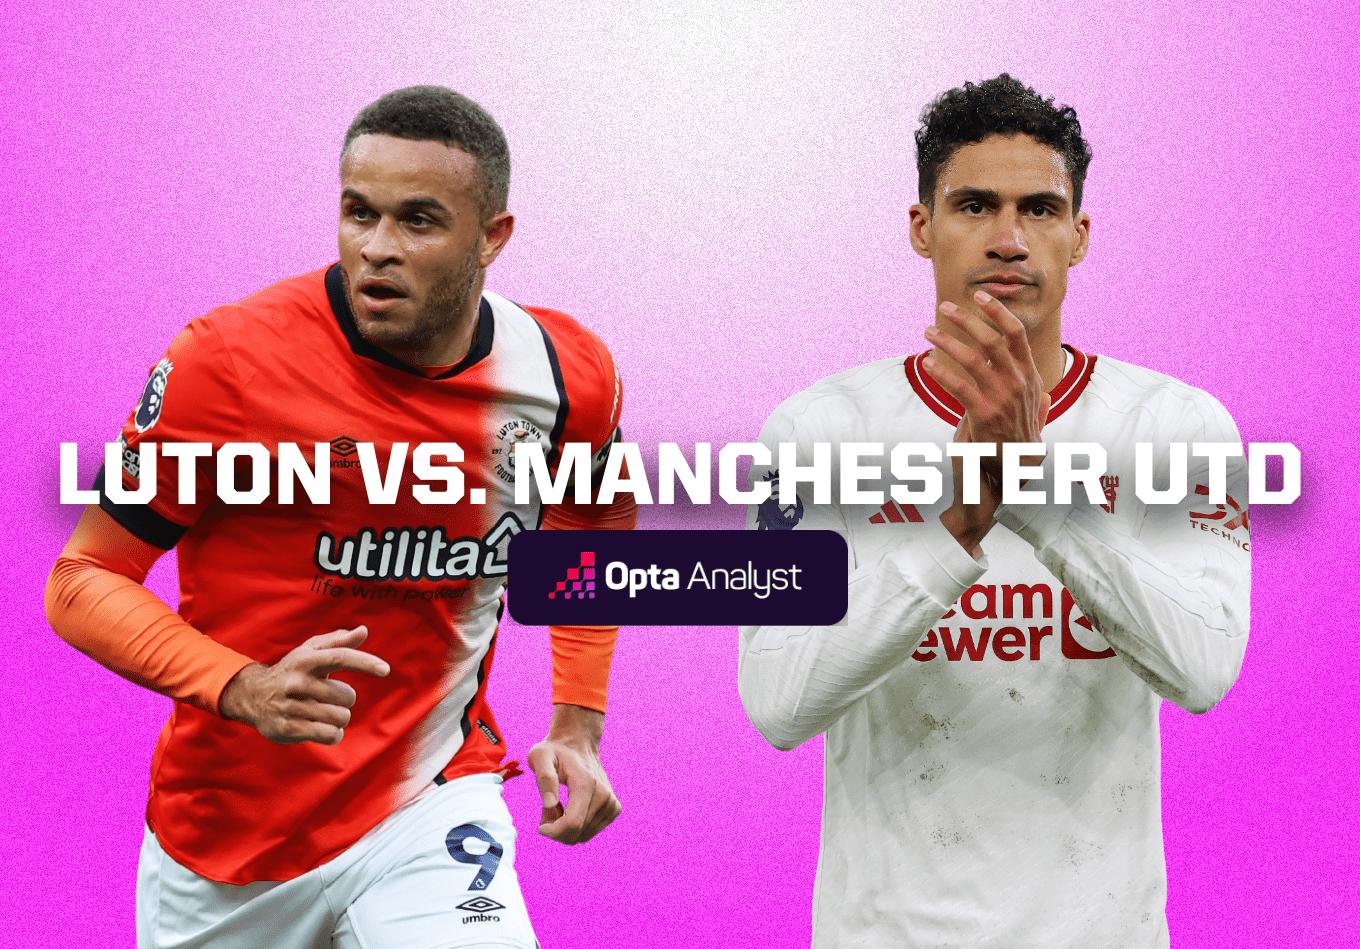 Luton vs Manchester United: Prediction and Preview